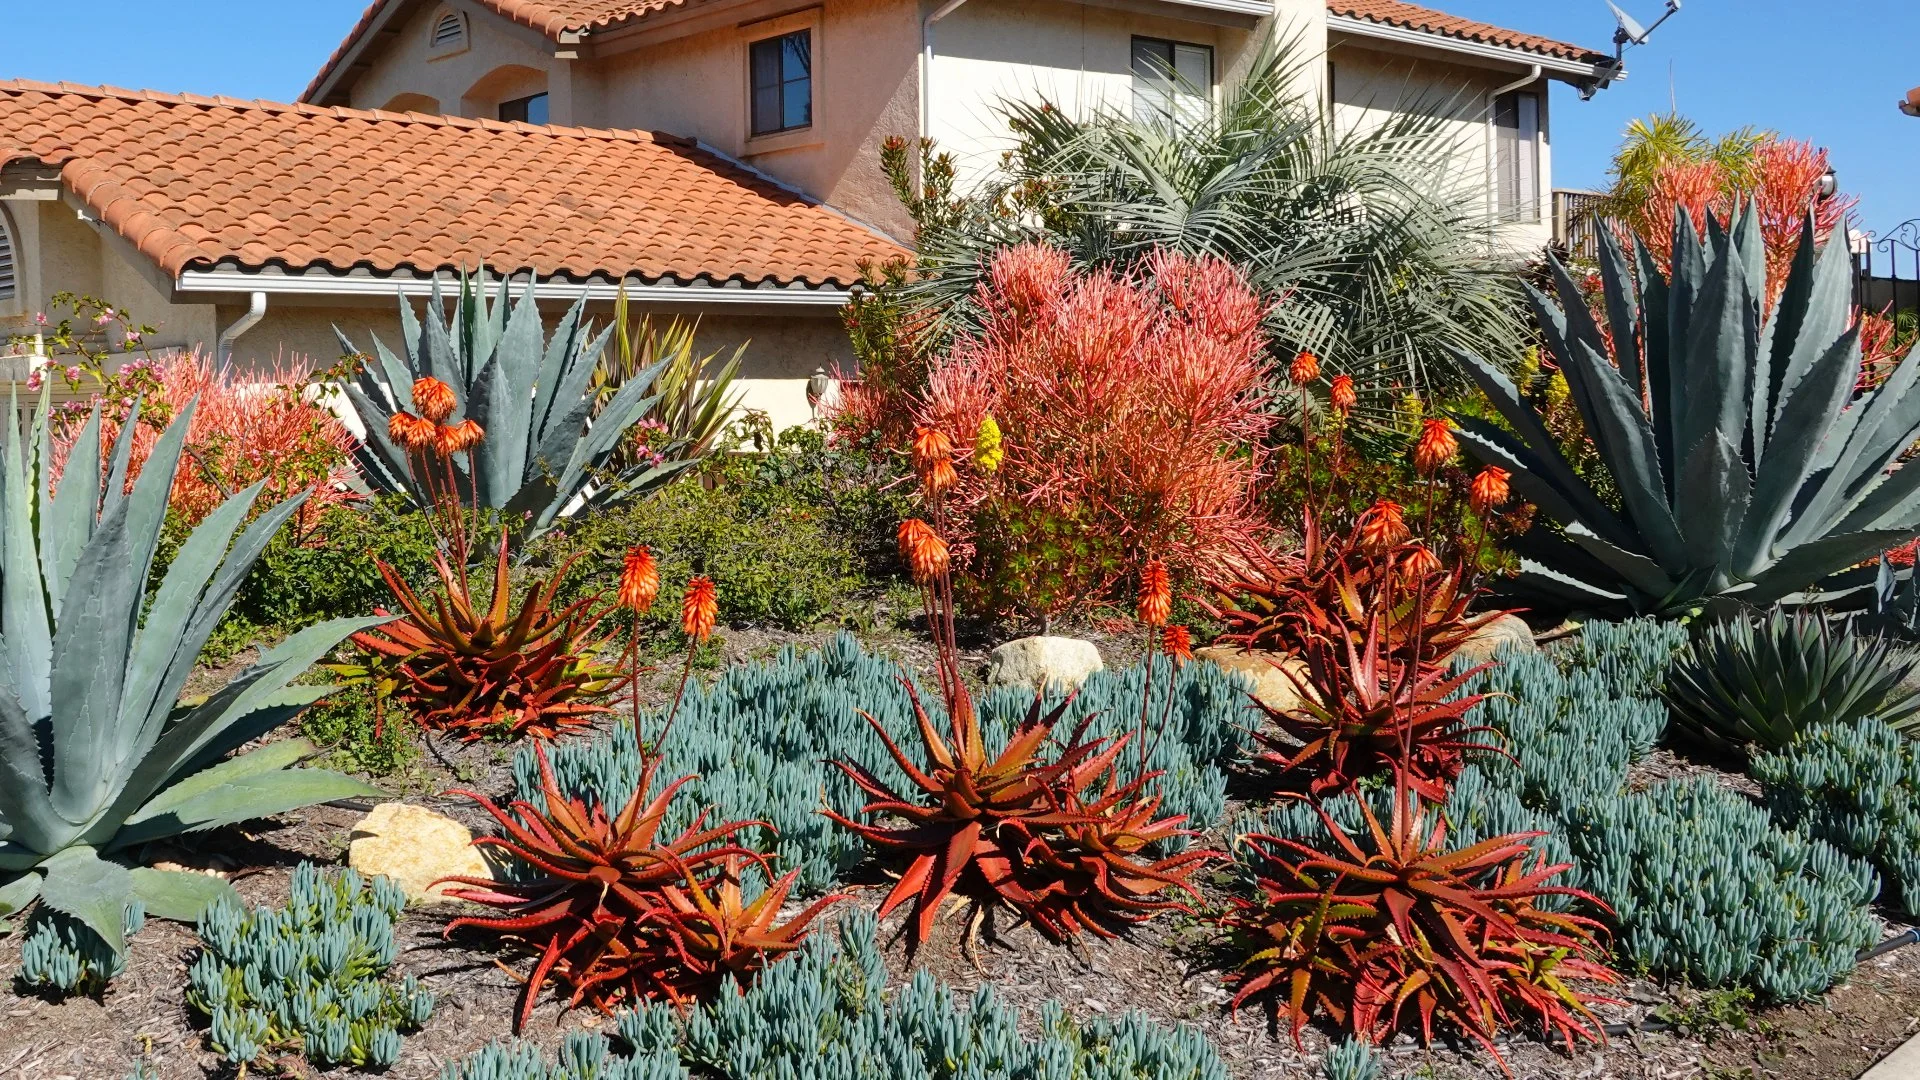 Consider These Things Before Installing New Plants in Your Landscape Beds!